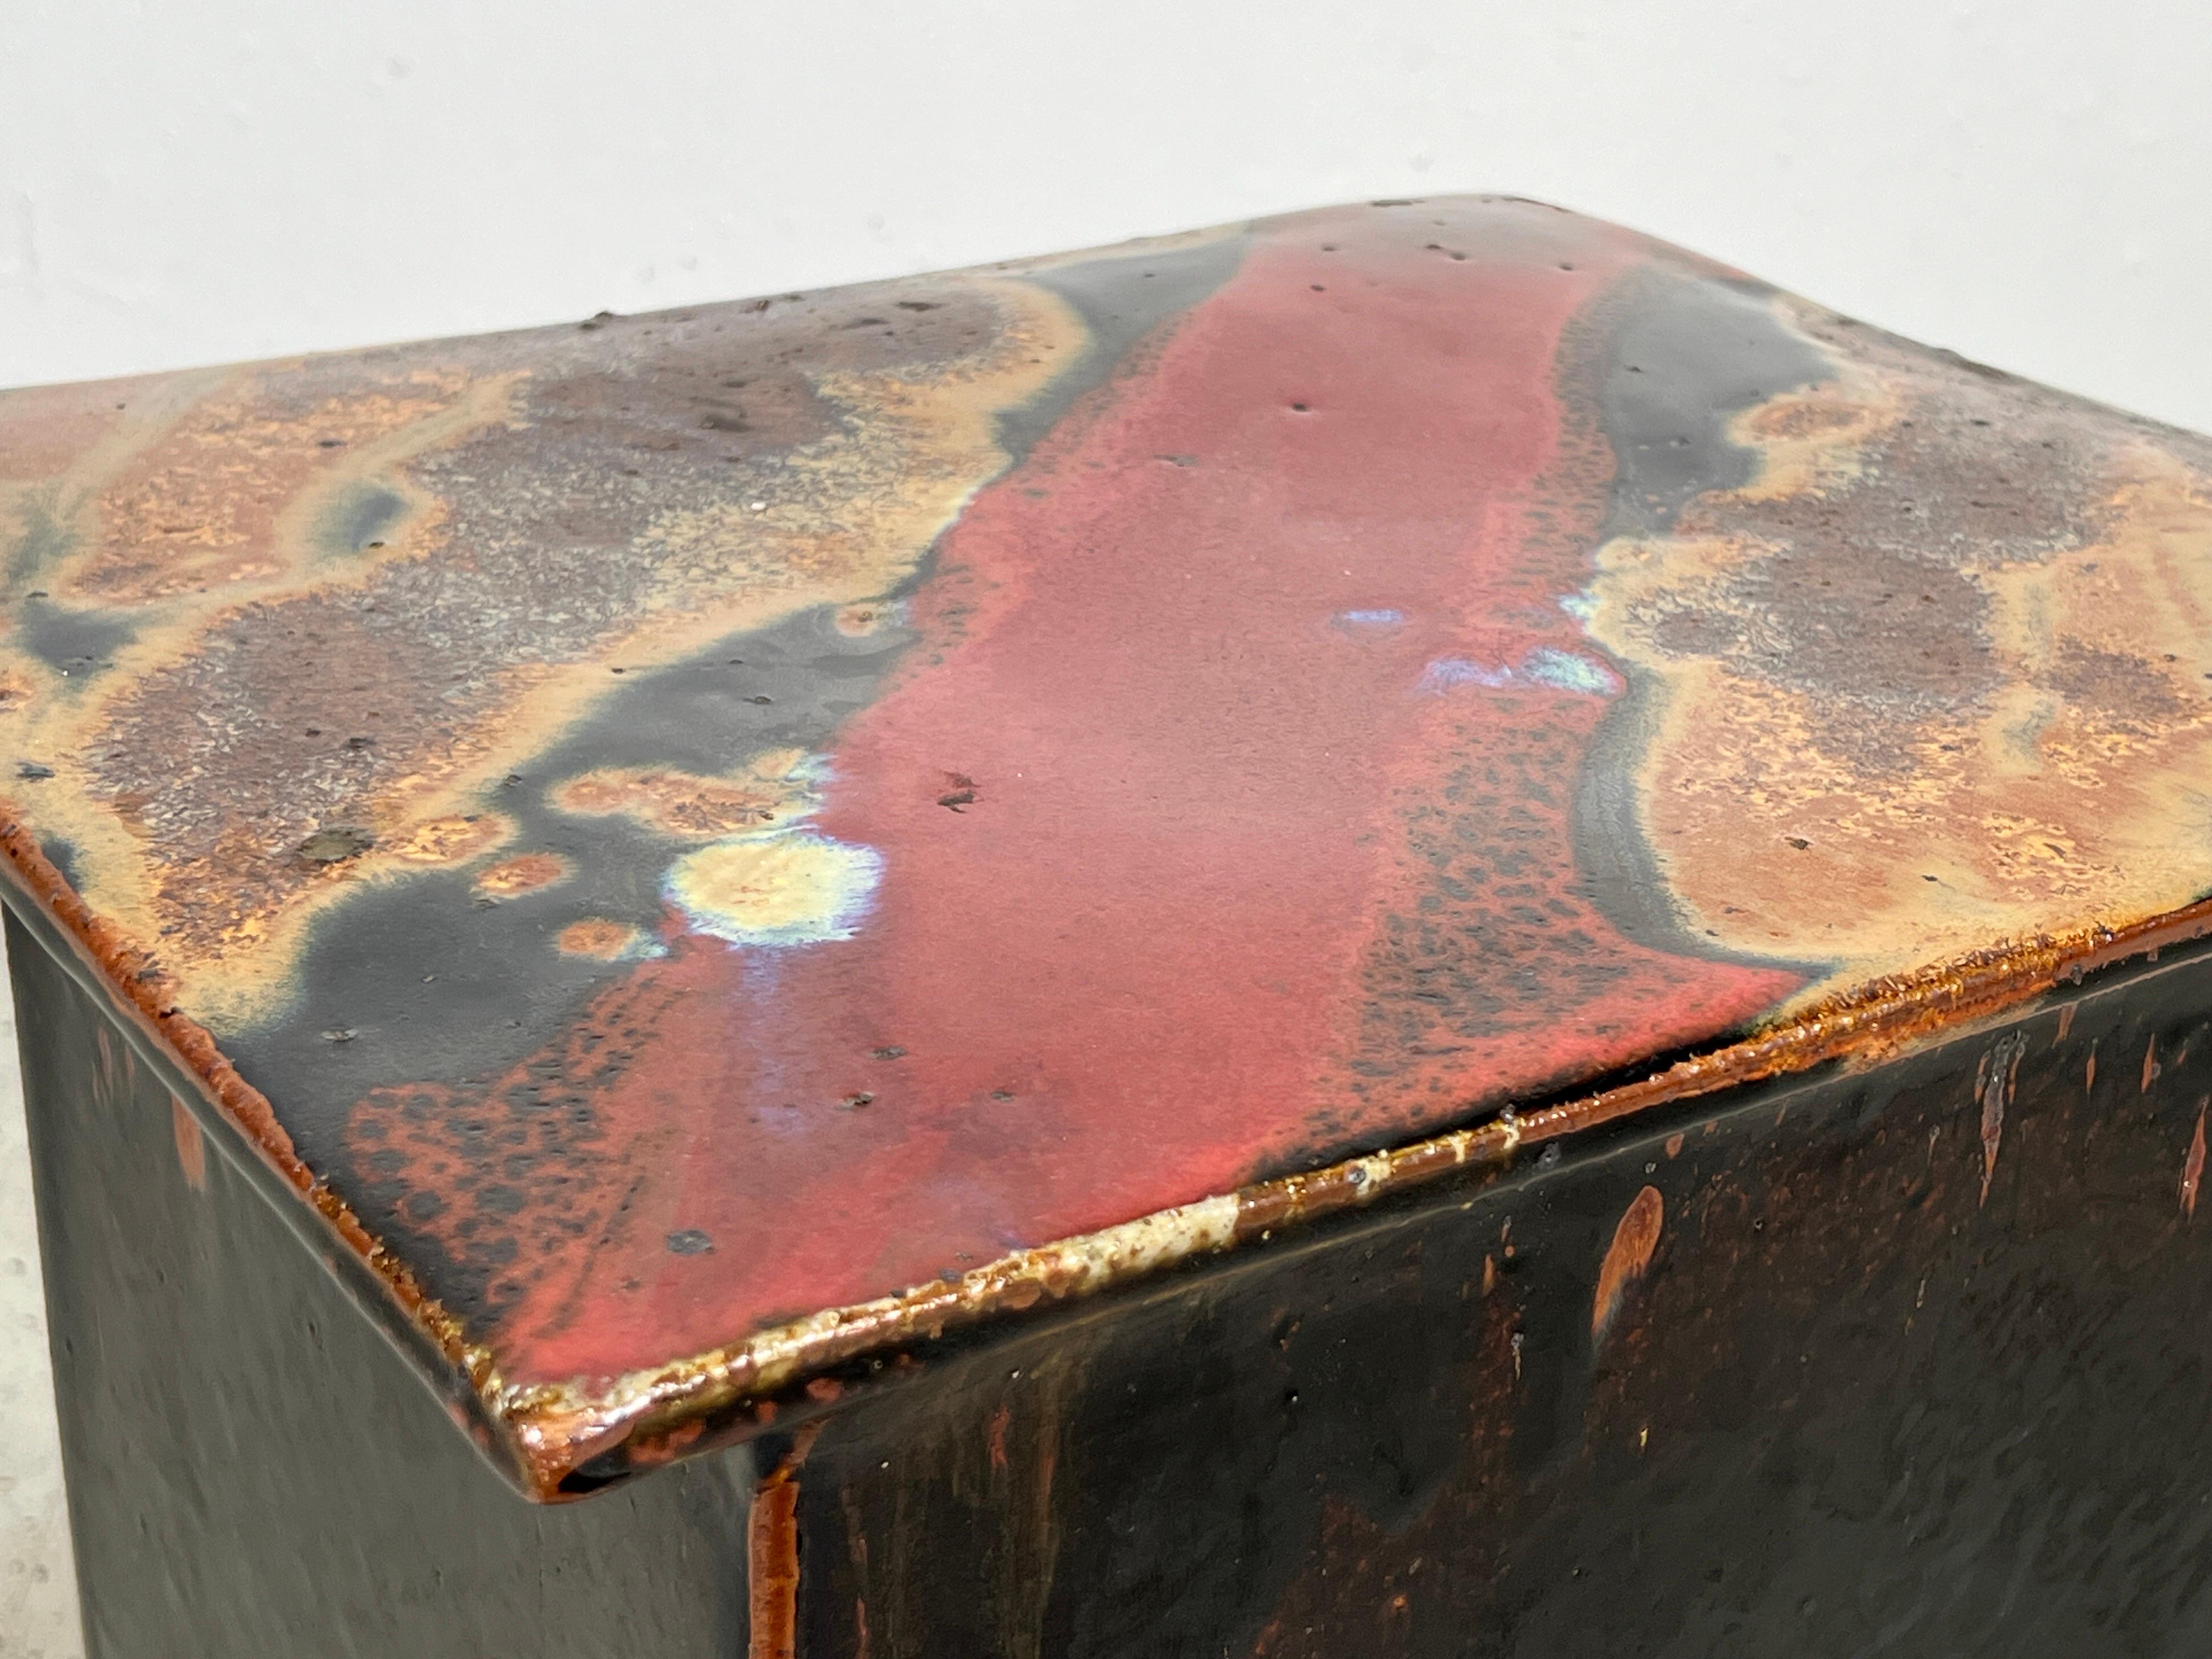 Eric O'Leary Ceramic Stool / Table For Sale 5